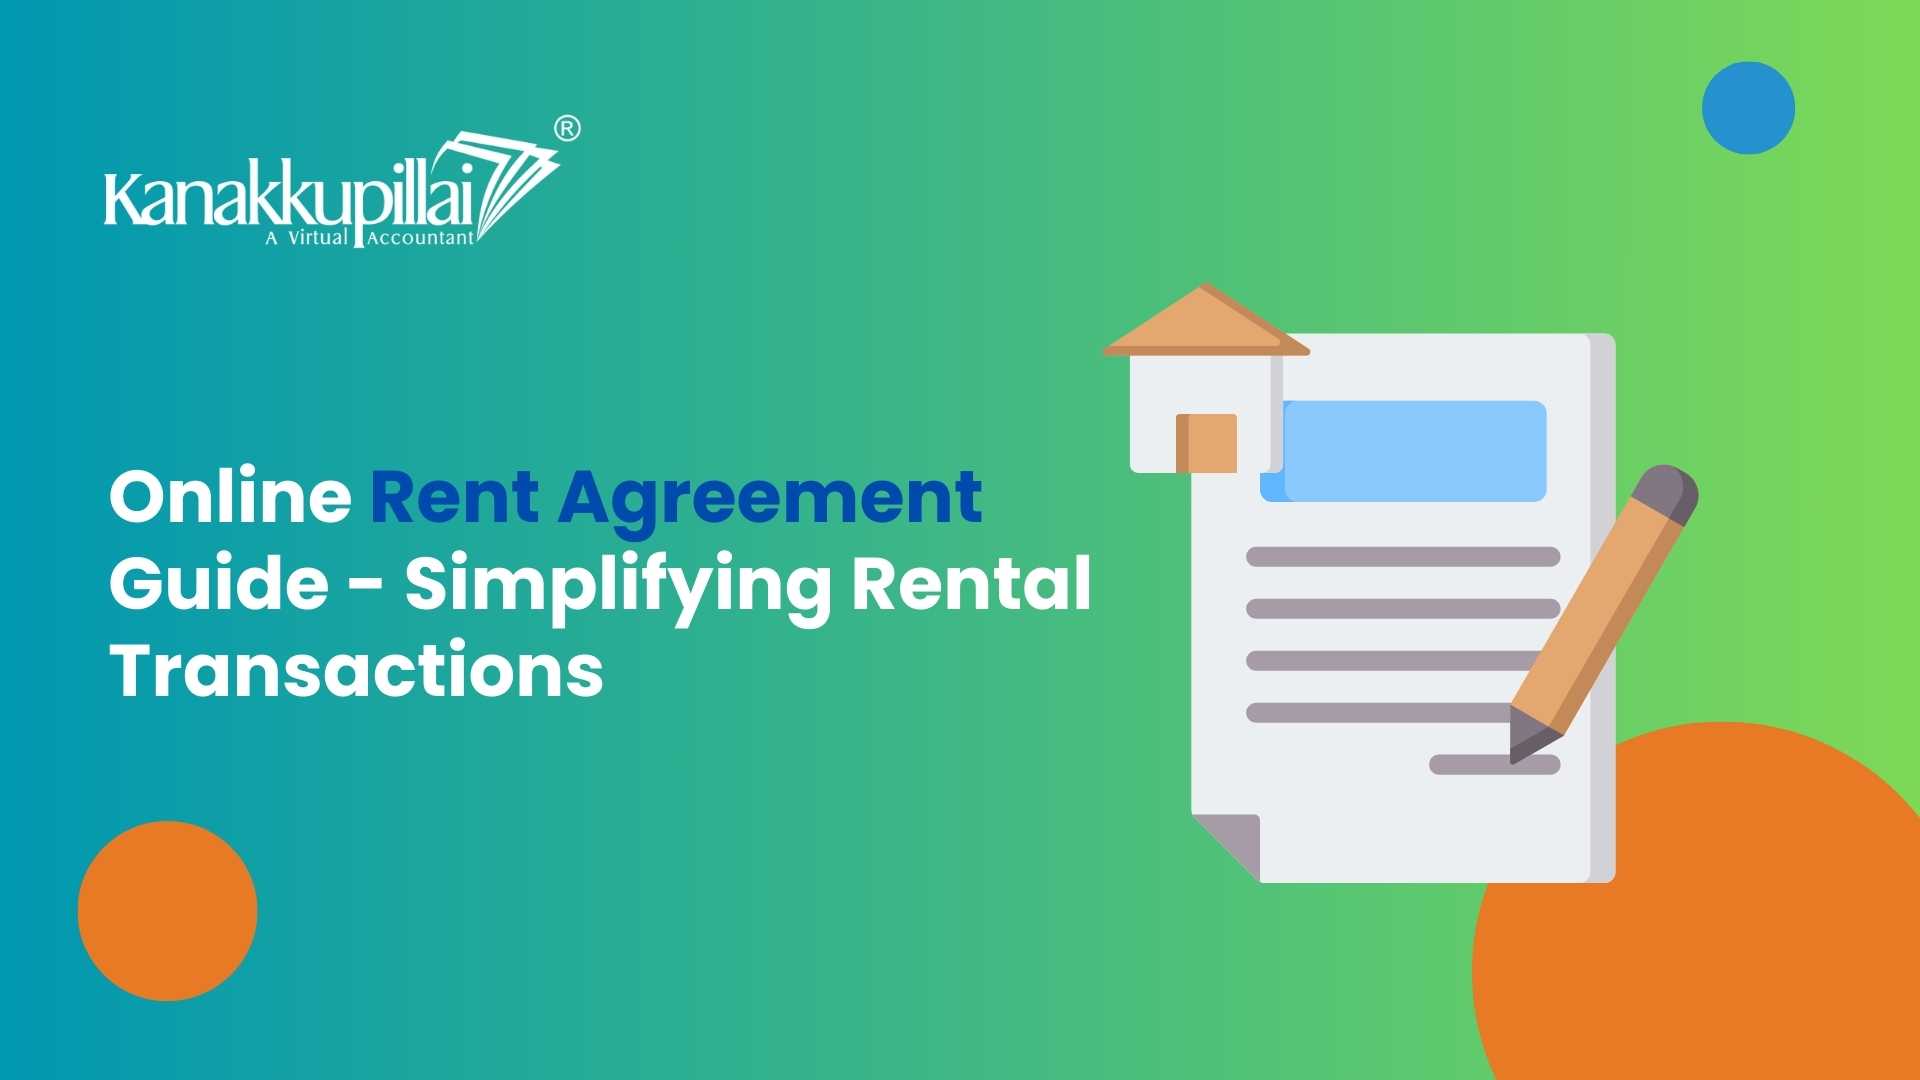 You are currently viewing Streamlining Rental Transactions: Guide to Rent Agreement Online in India